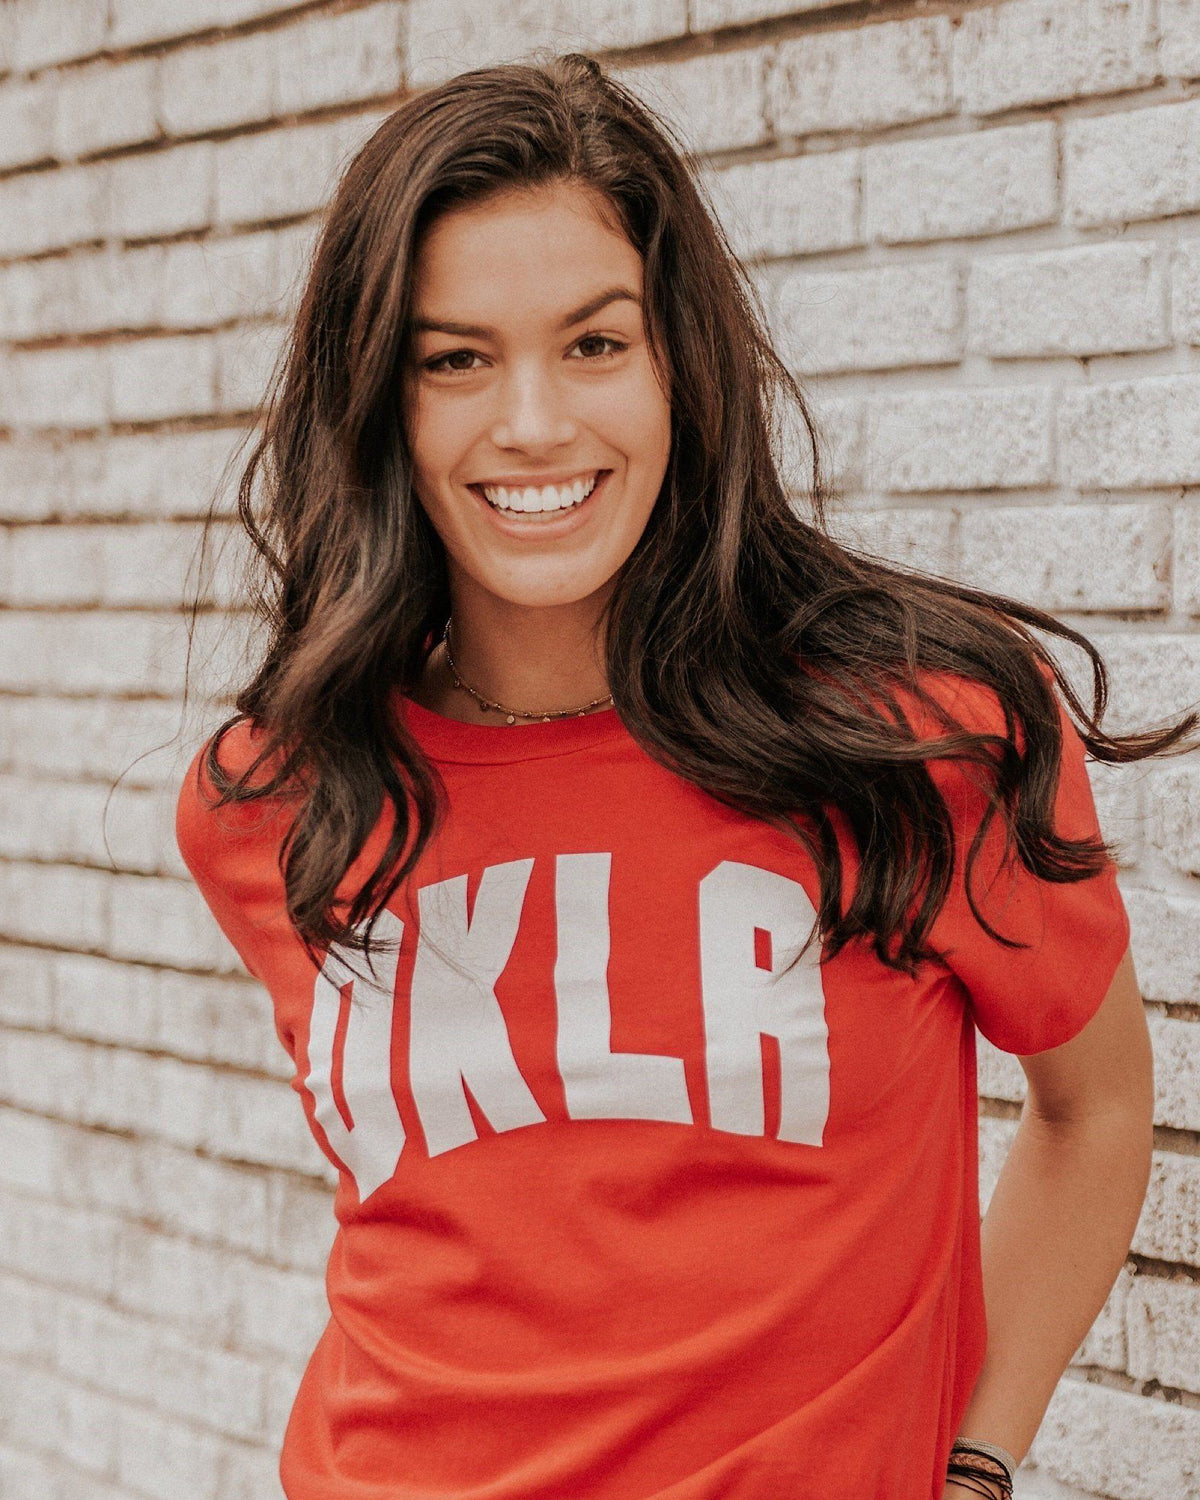 OKLA Red Tri-Blend Tee with White Letters - shoplivylu